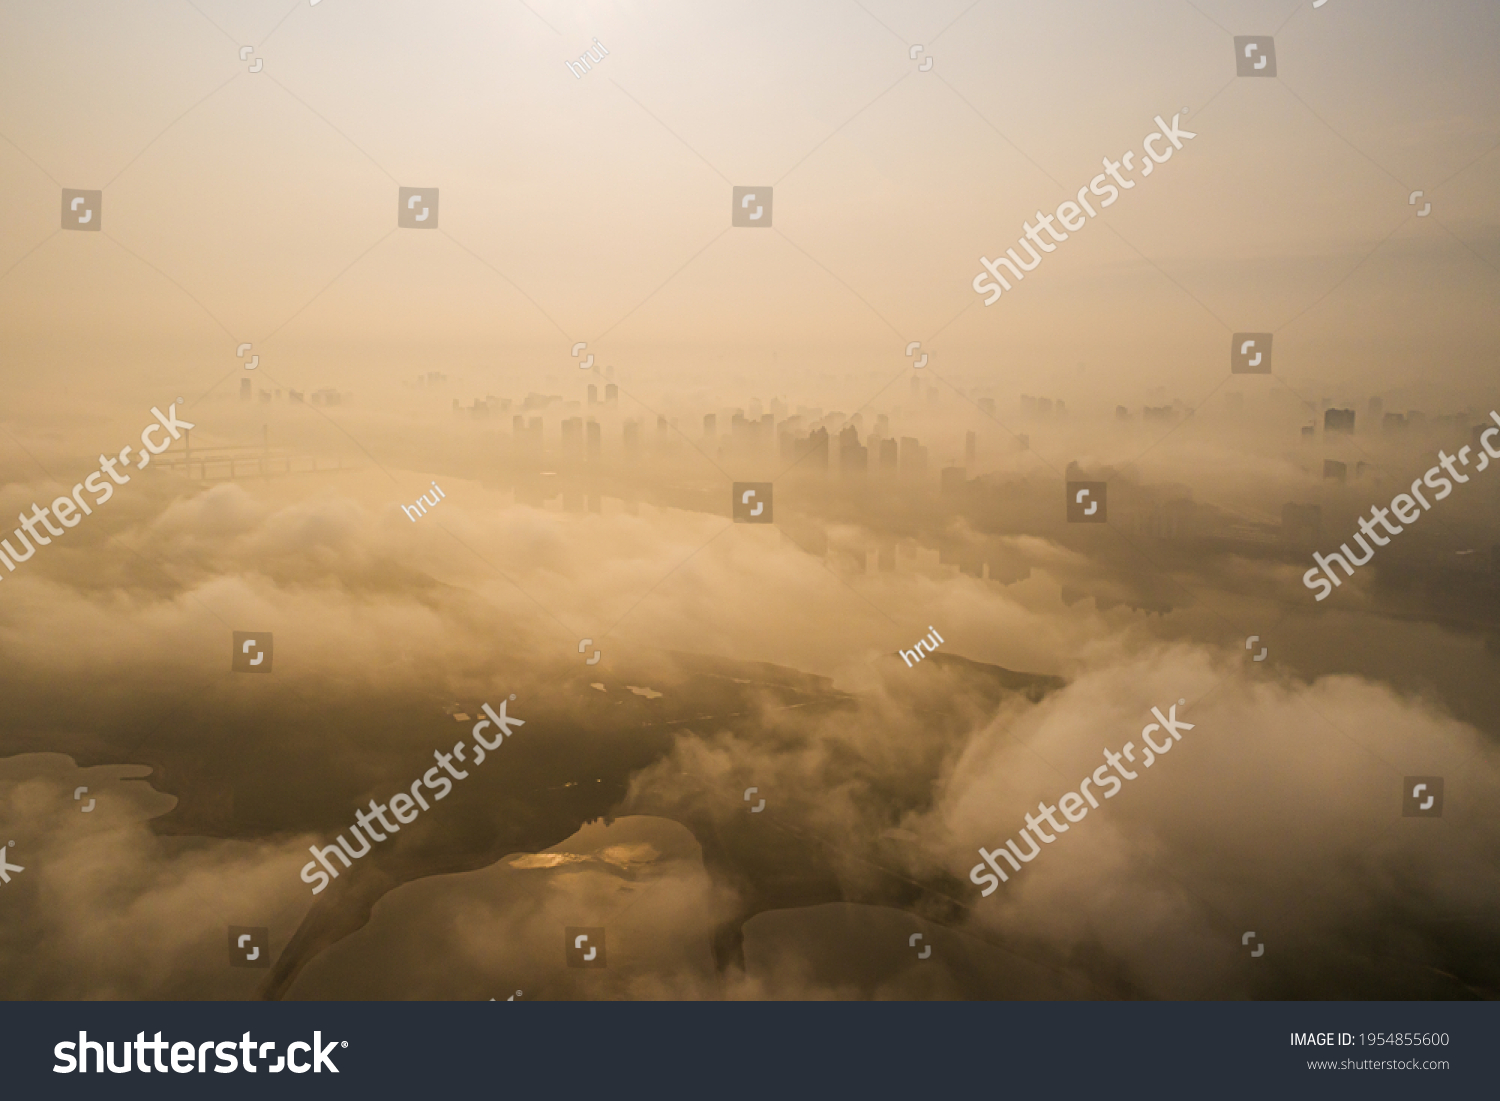 View across Warsaw skyline showing in sunset with smog and dust in the air, Low visibility caused by pollution problem in urban area, Big city in the fog, Fog and smog over Warsaw #1954855600